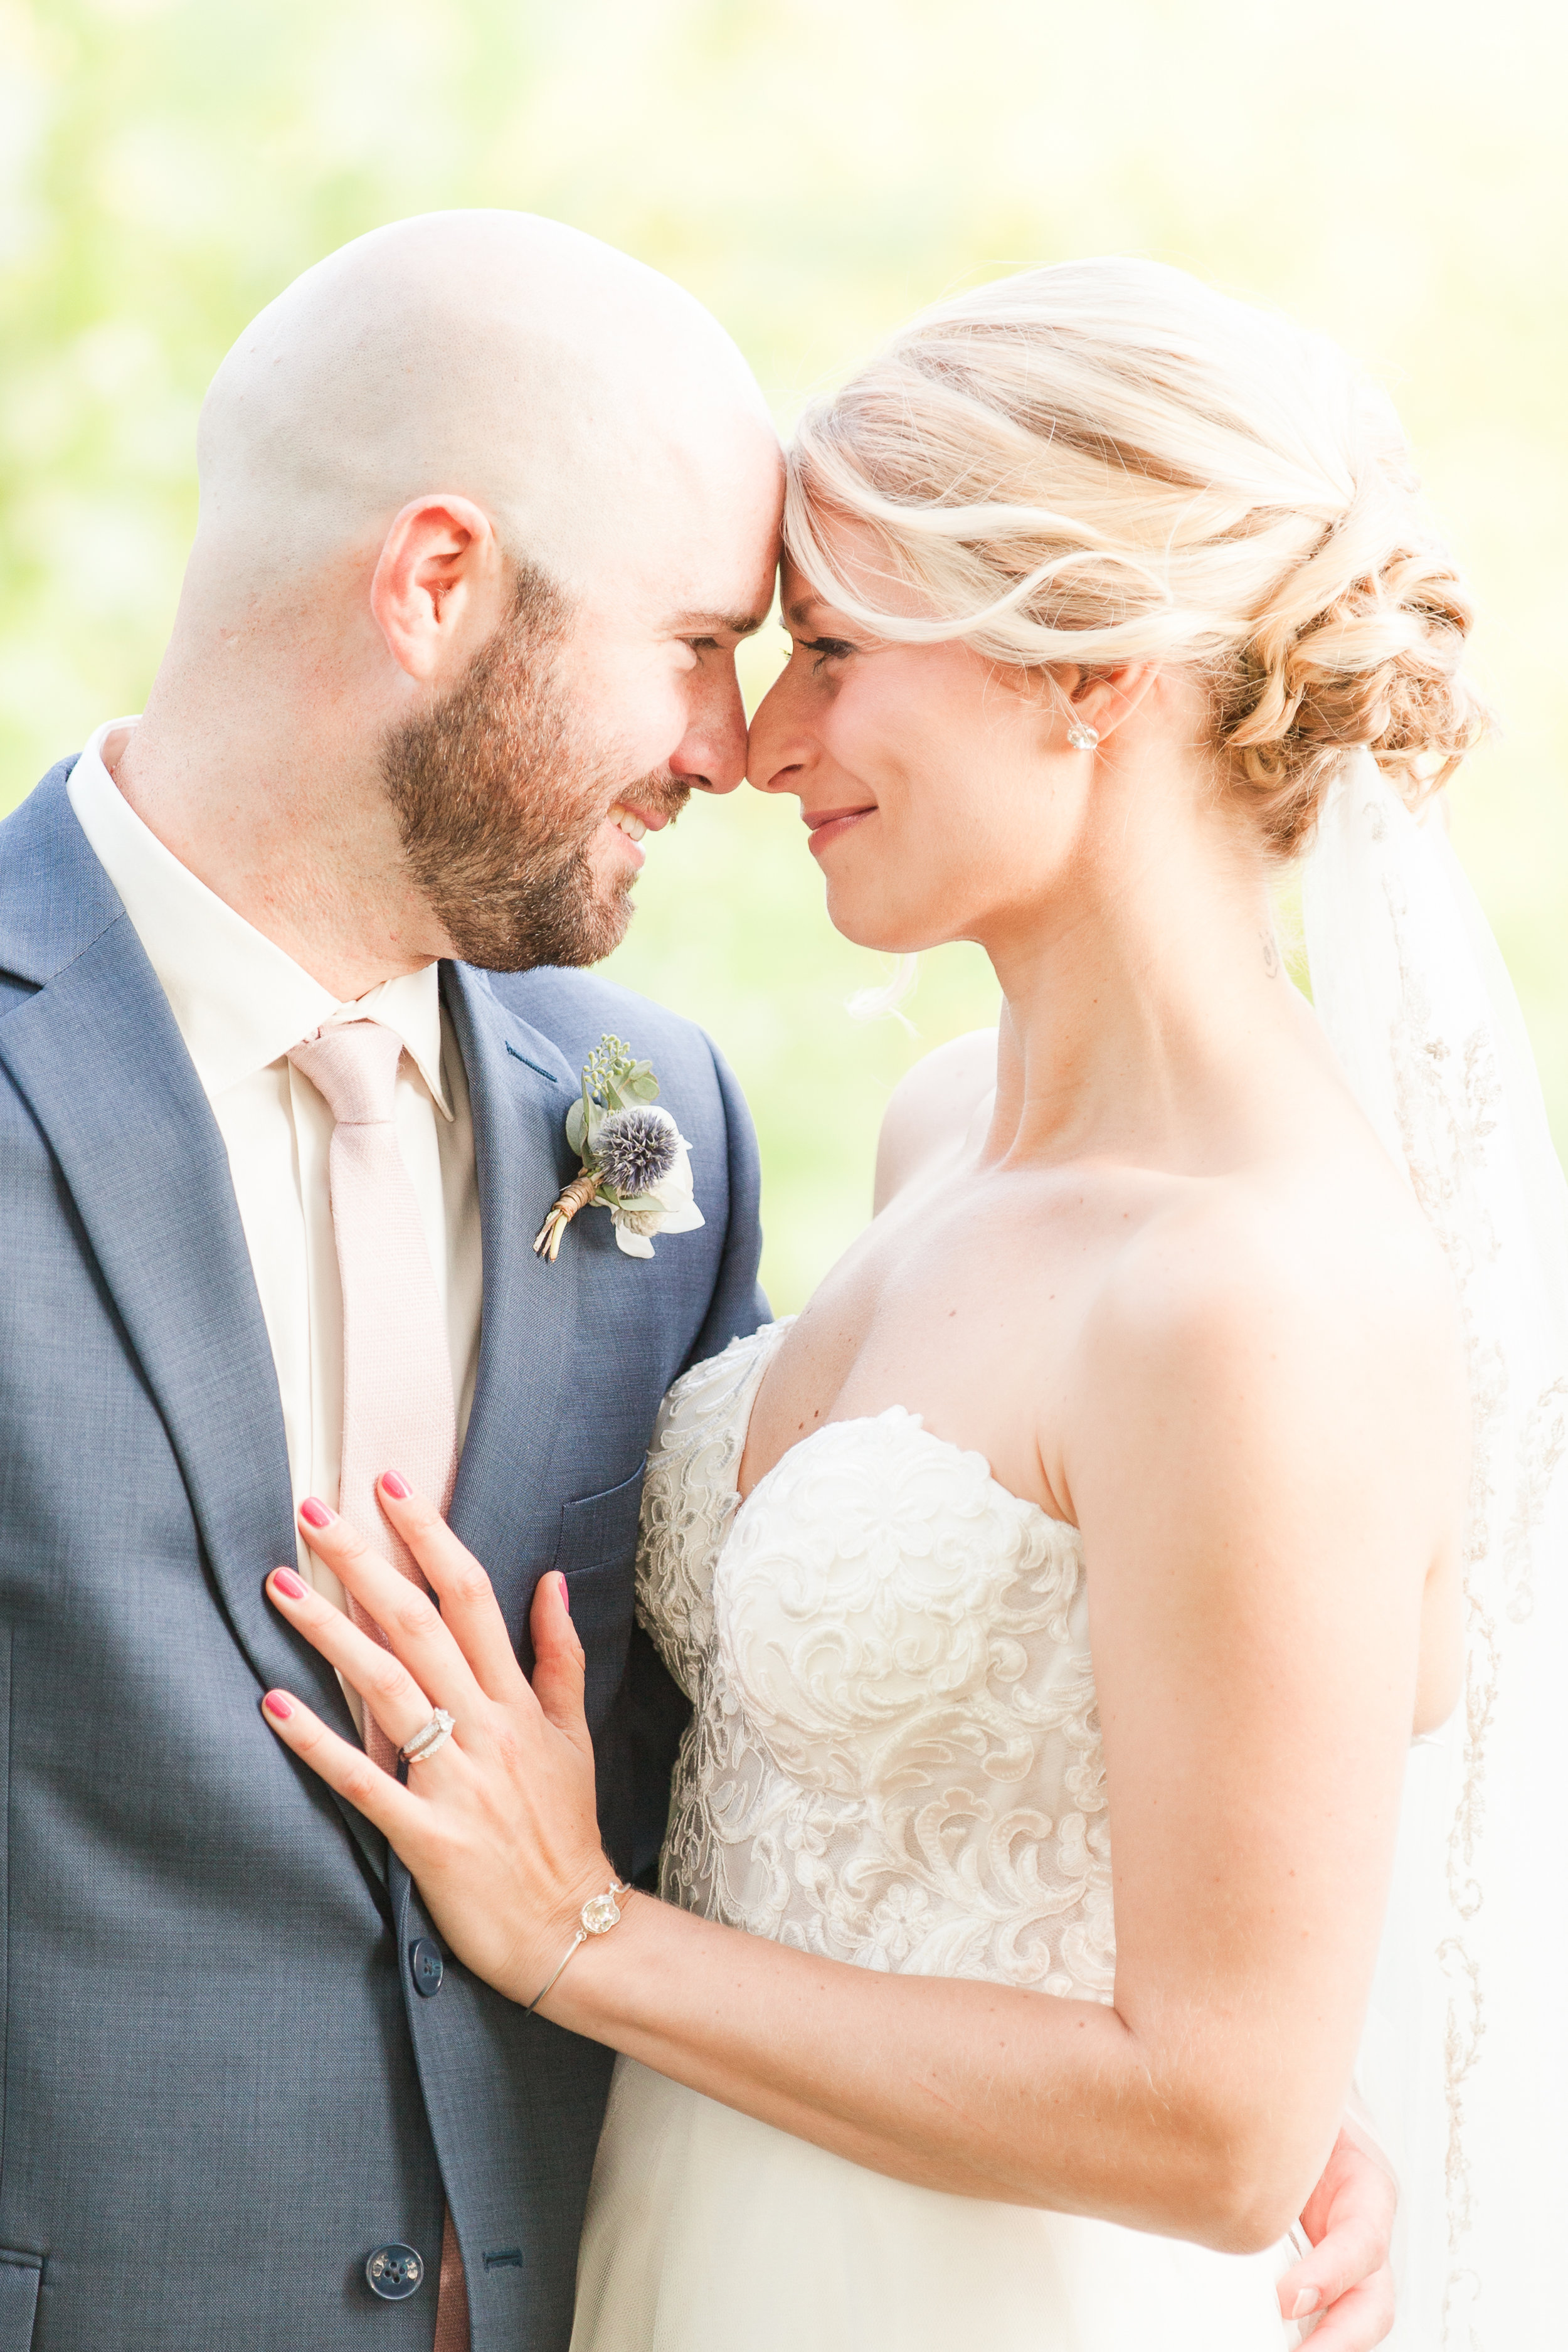 lee nh wedding photographer | amy brown photography | flag hill winery wedding 